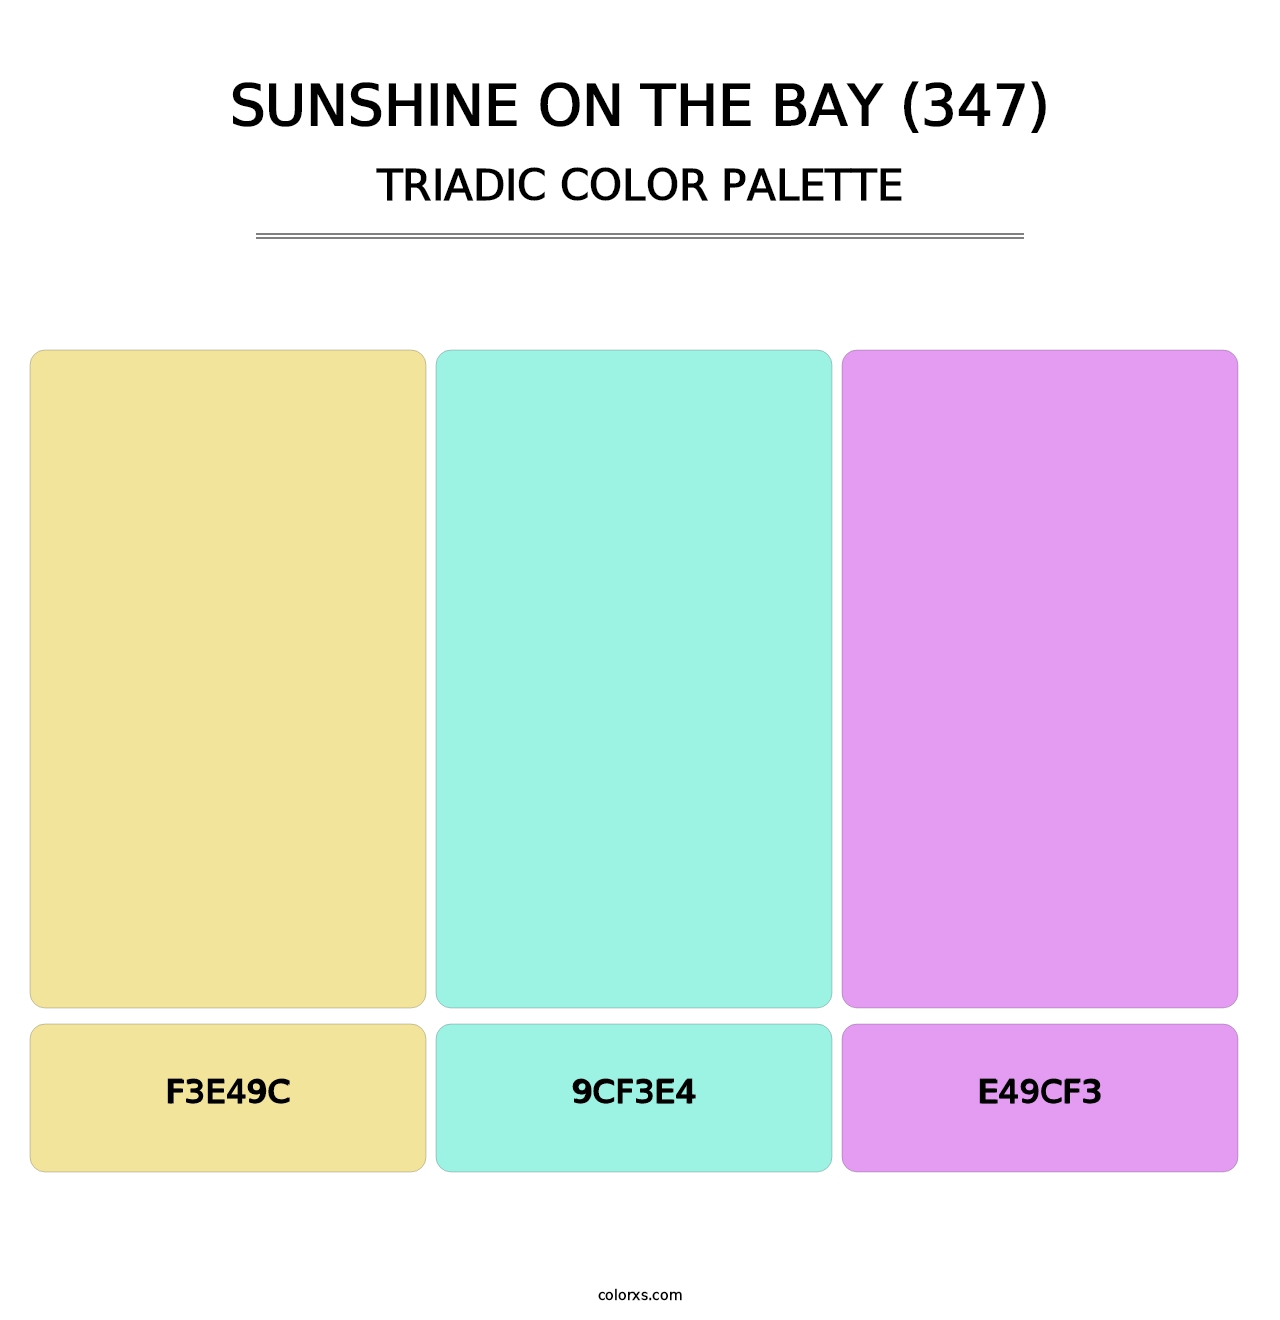 Sunshine on the Bay (347) - Triadic Color Palette